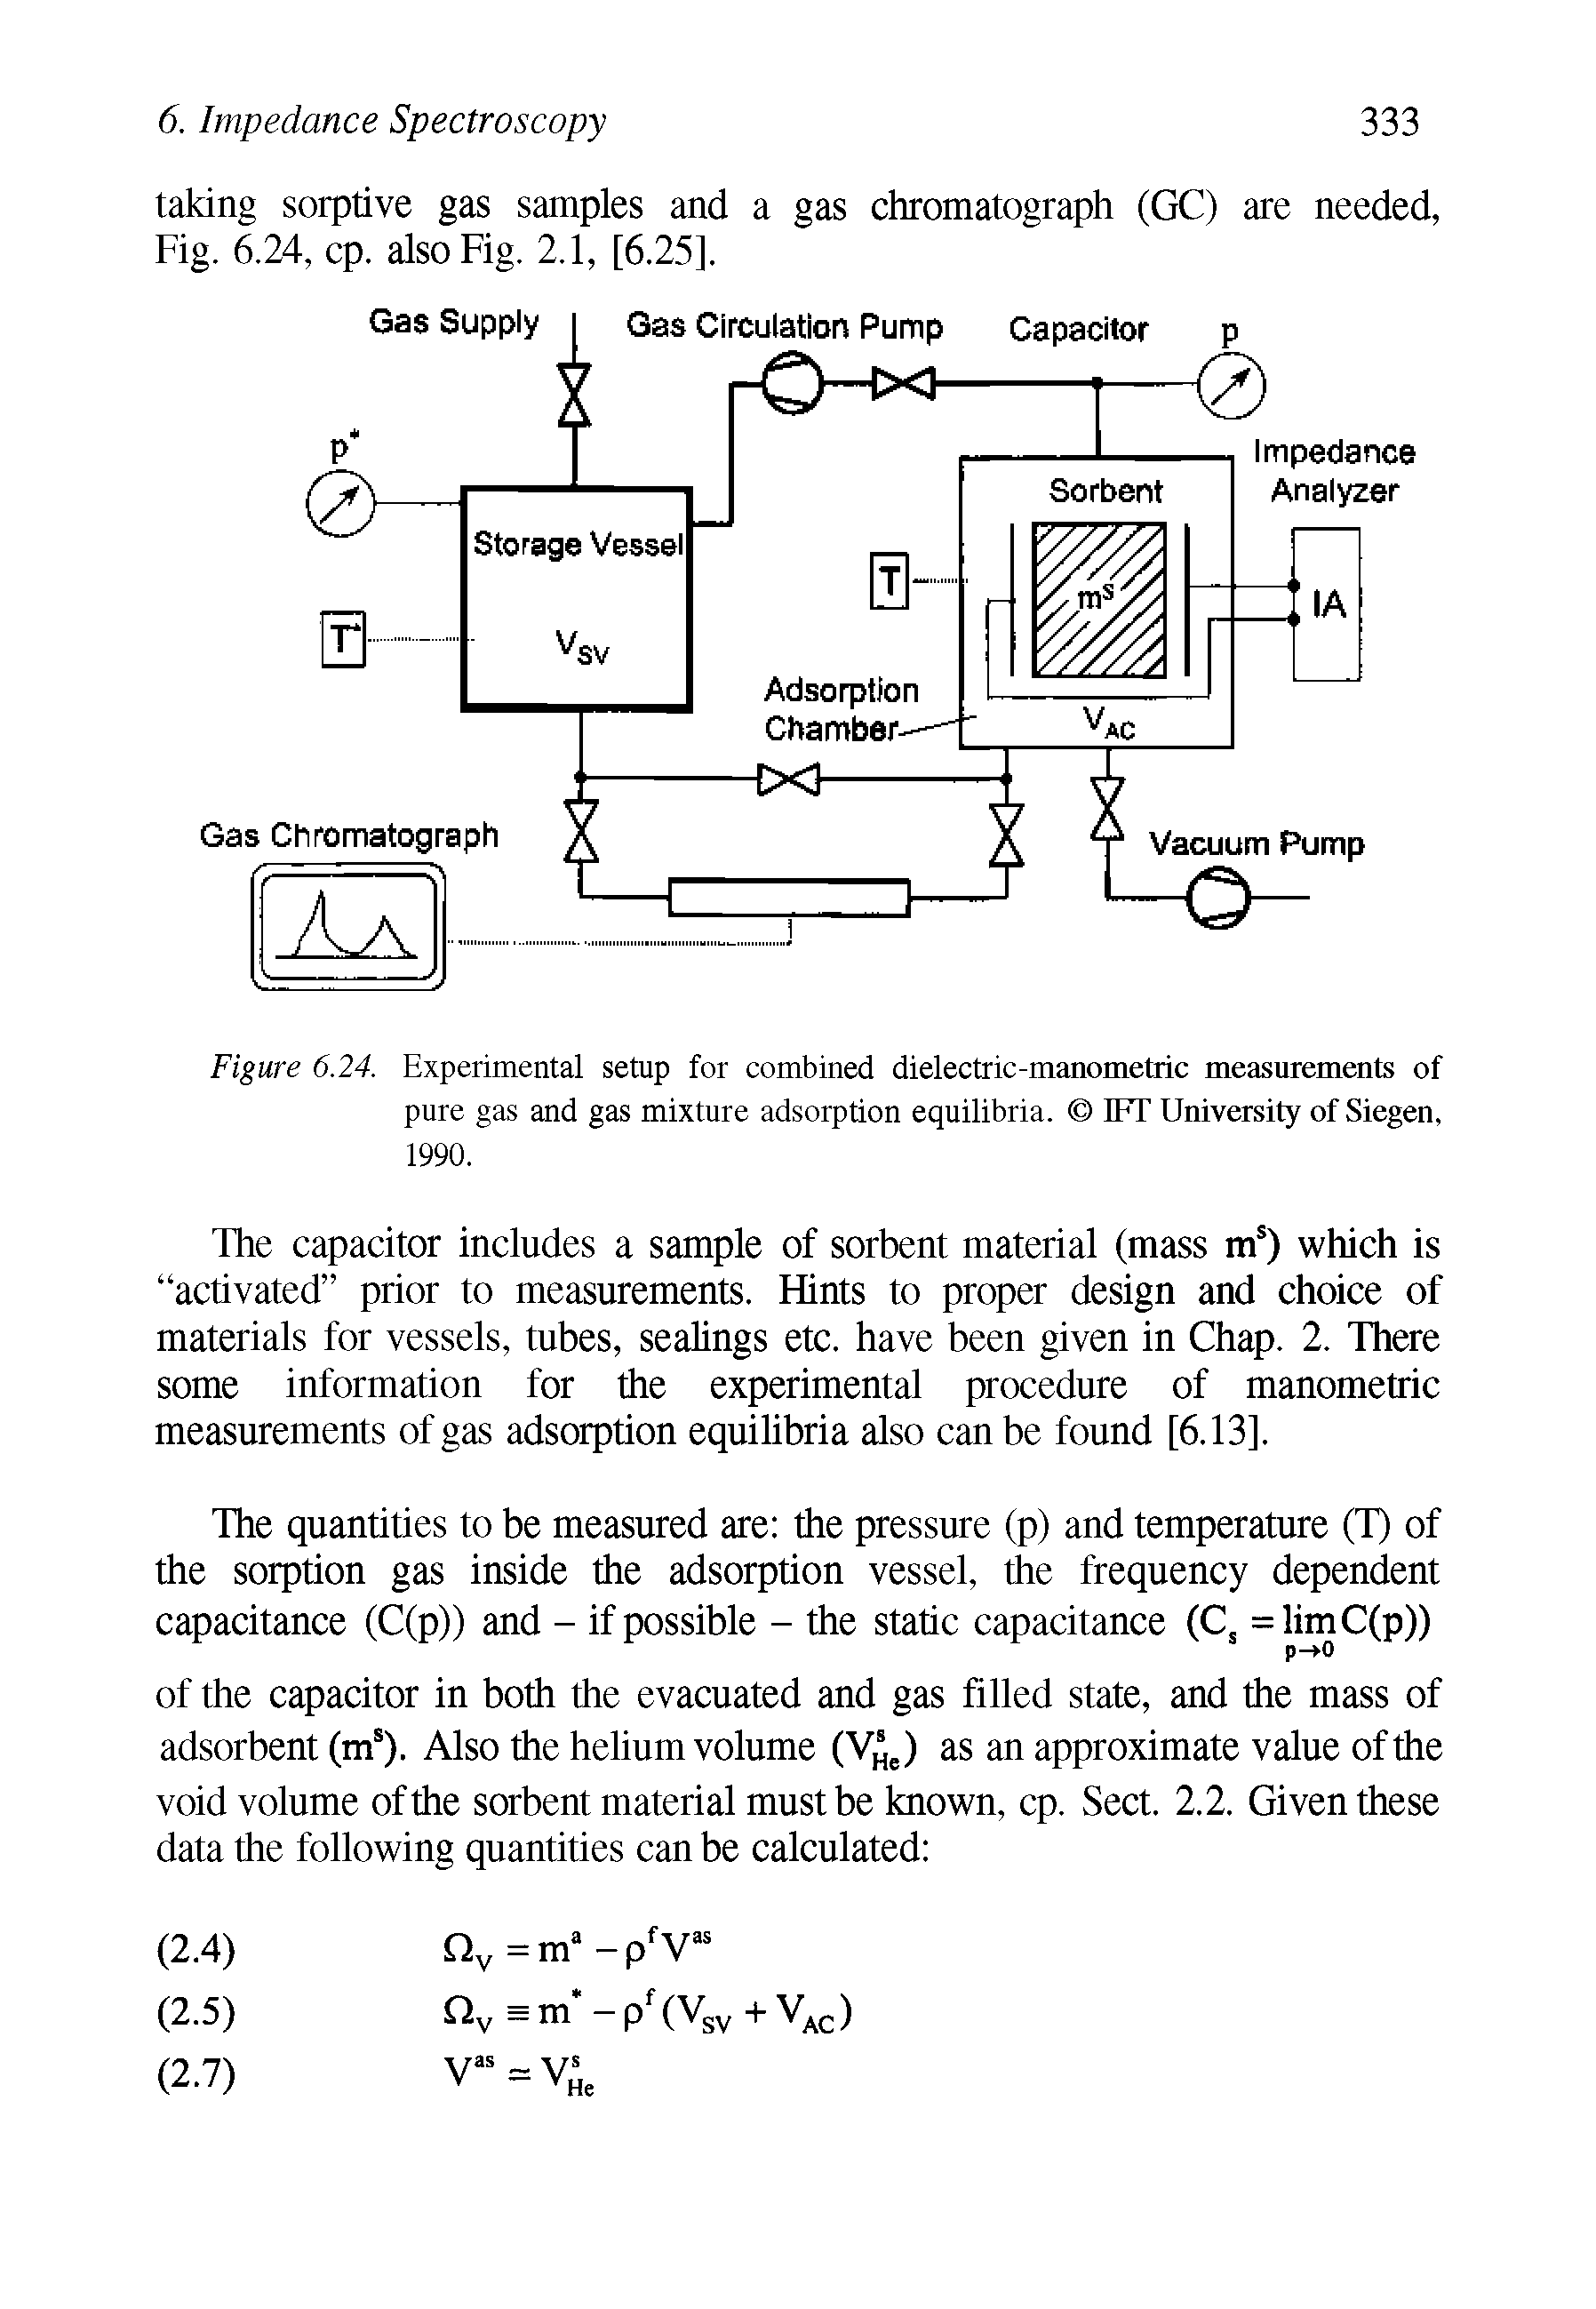 Figure 6.24. Experimental setup for combined dielectric-manometiic measurements of pure gas and gas mixture adsorption equilibria. IFT University of Siegen, 1990.